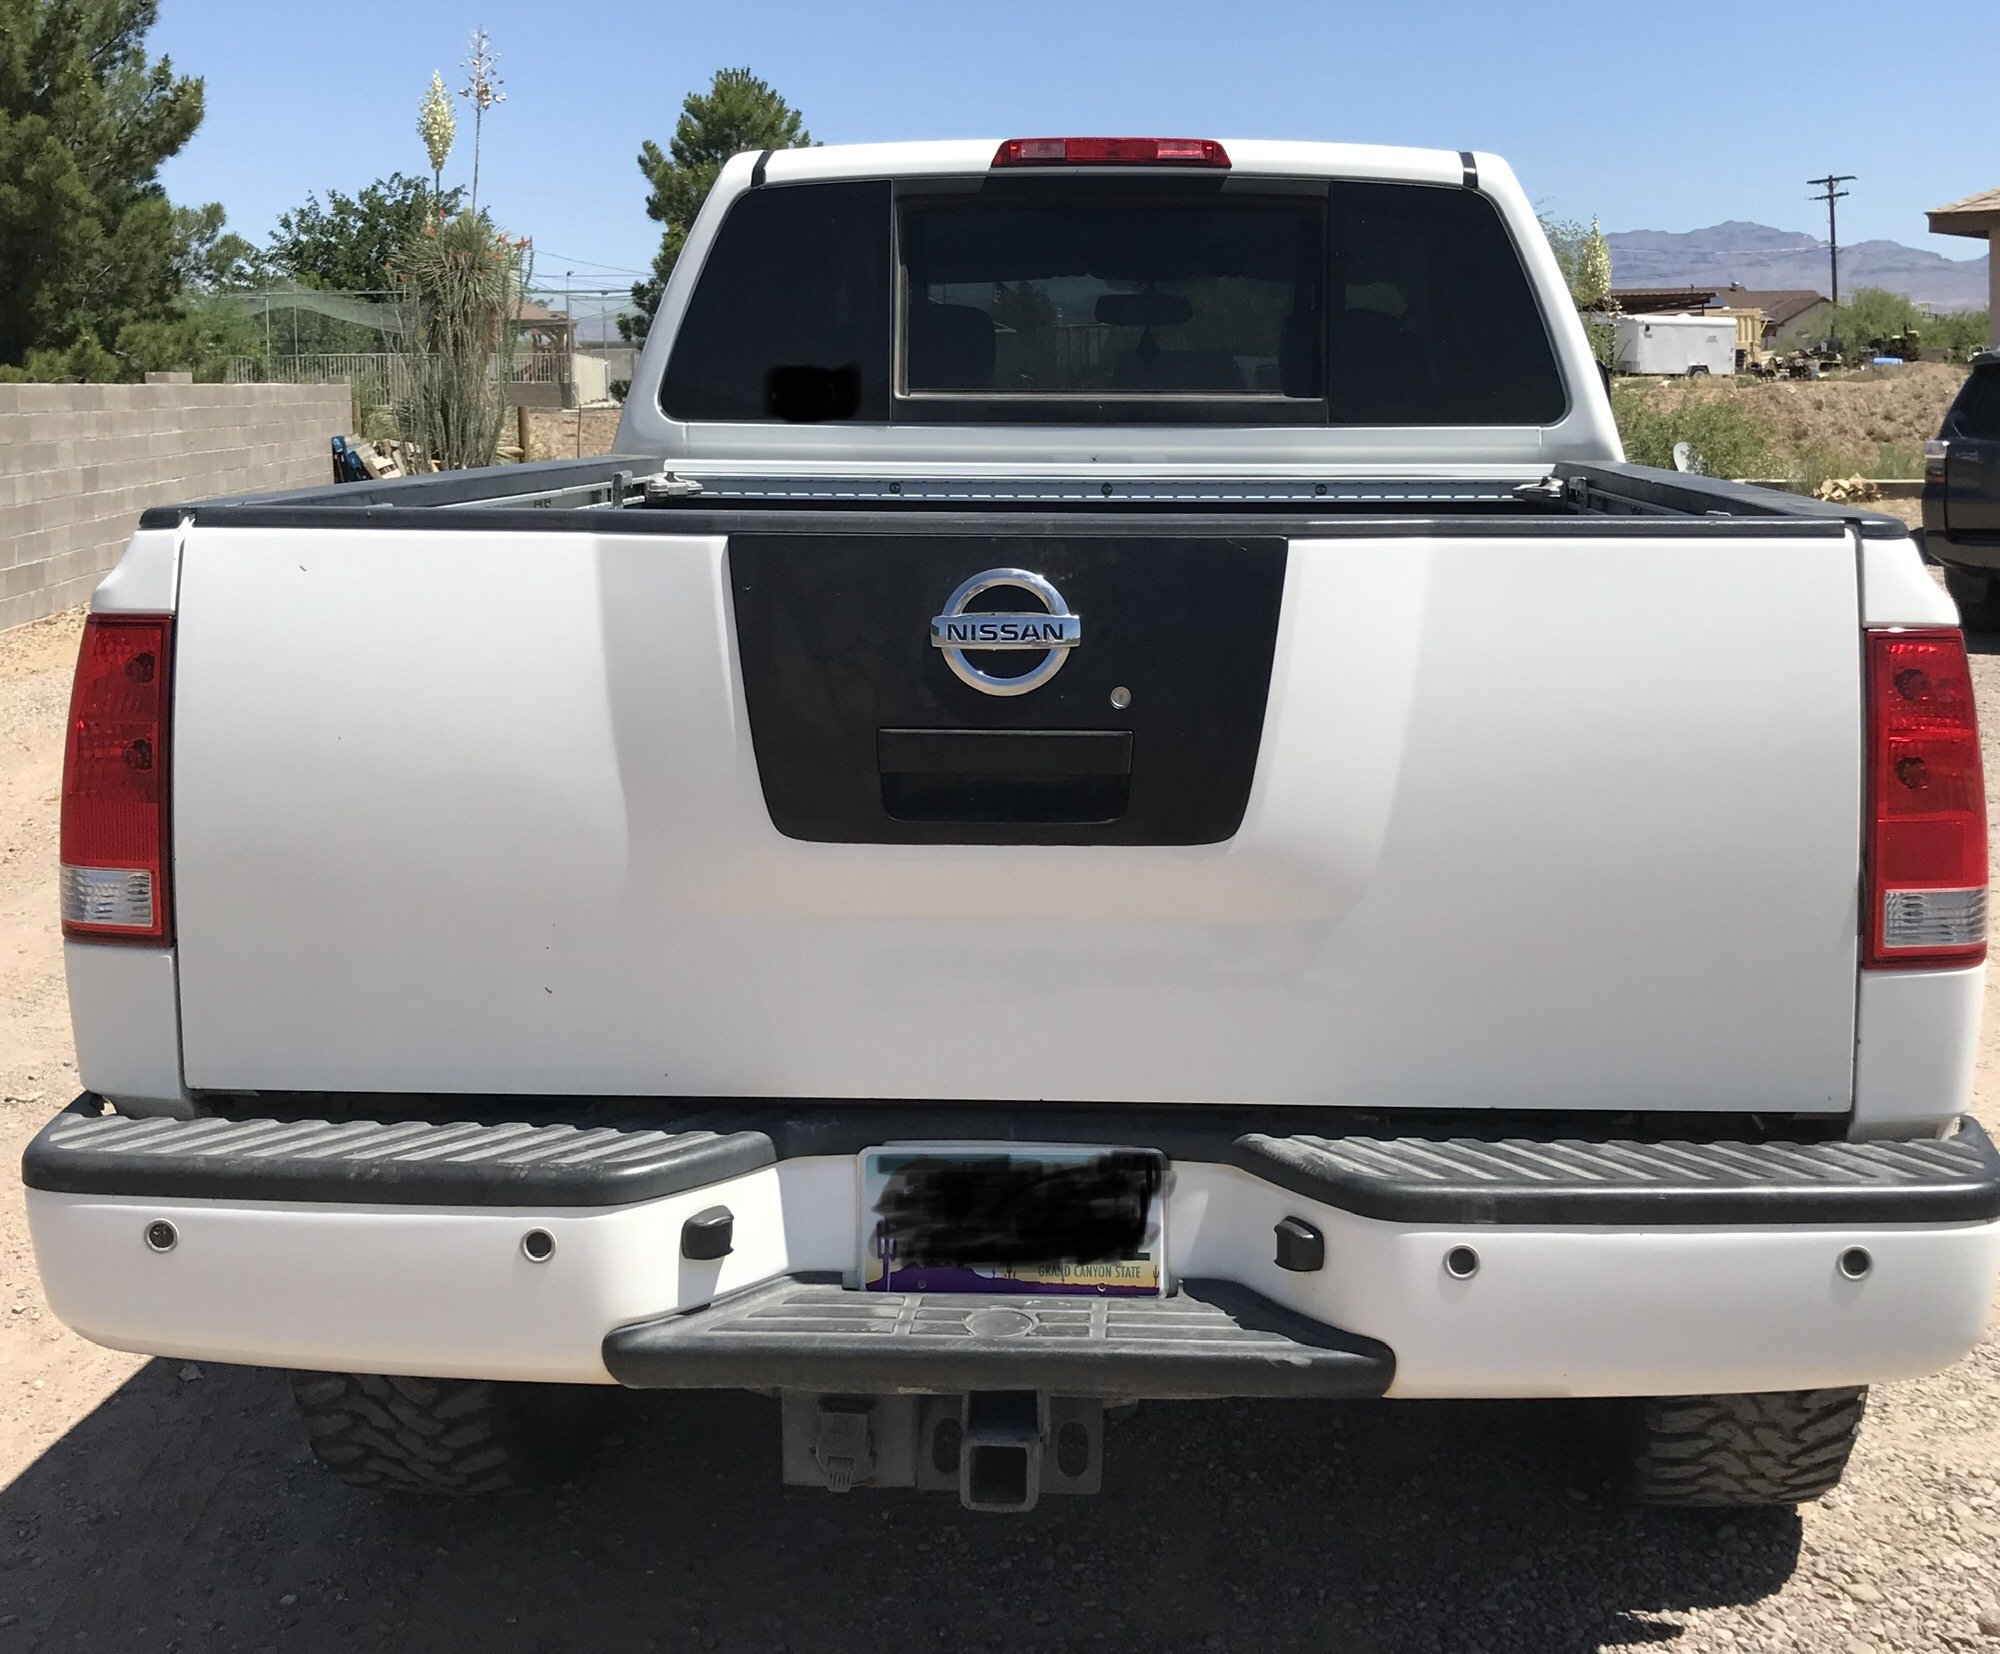 2010 Nissan Titan Pro-4x - Classified Ads - CouesWhitetail.com 2010 Nissan Frontier Pro 4x Towing Capacity